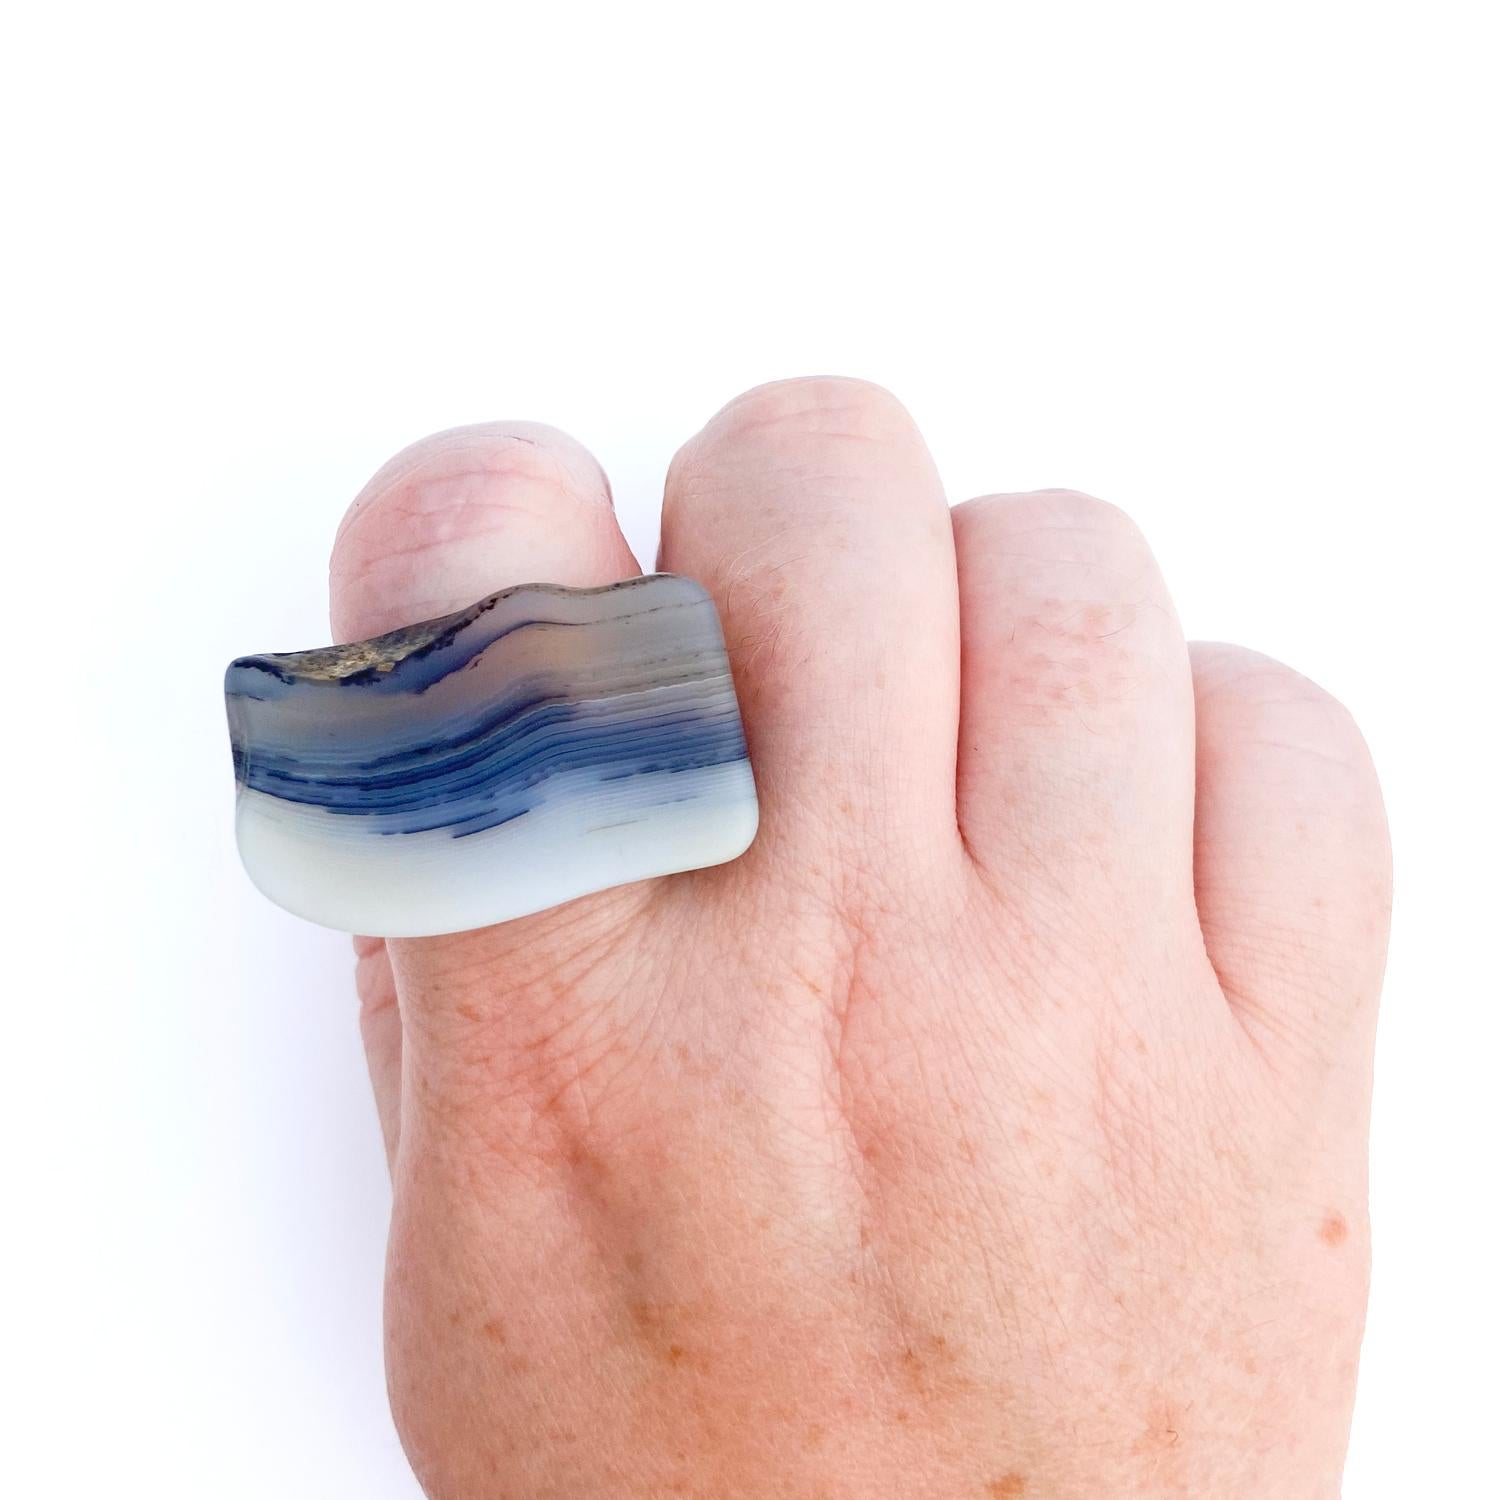 I love the translucent waves in this ring and how it starts to crimp at the end. The lines are so cool!

Each ring is made slowly by Marge out of larger pieces of stone that takes over a month to carefully carve, shape and, refine into this